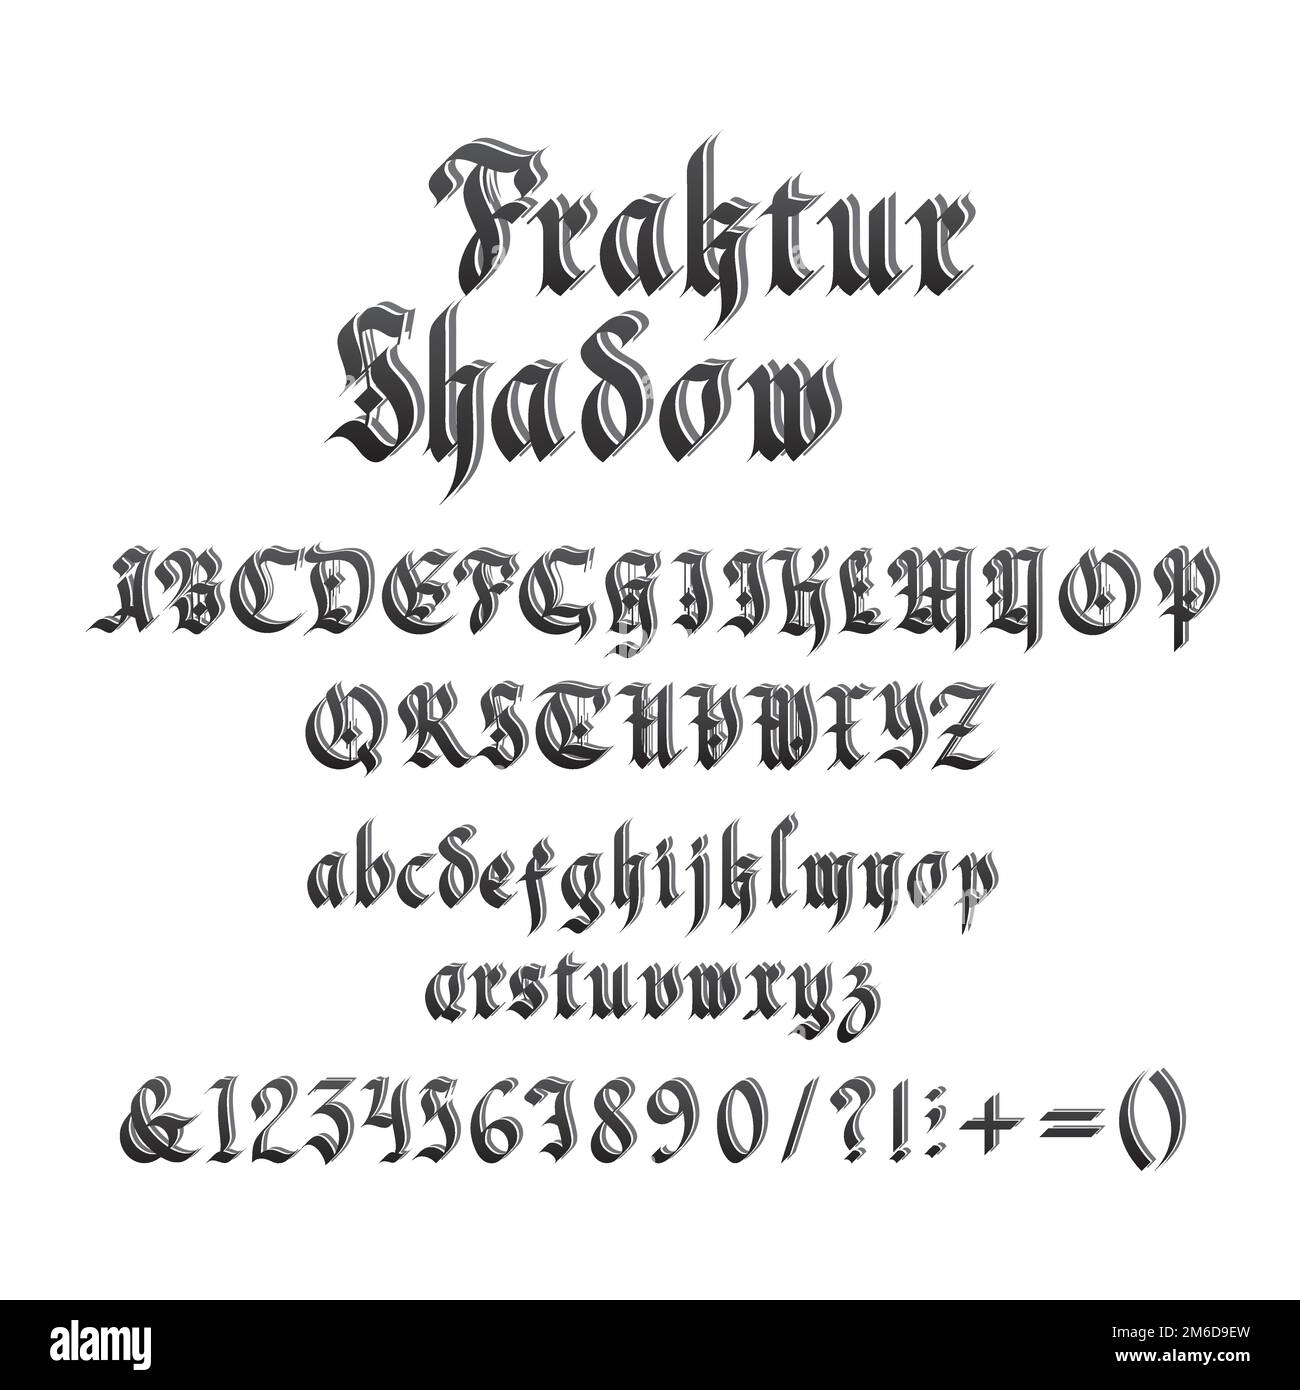 Vintage gothic font with shadow vector illustration. Unique decorative black capitals and lowercase calligraphic alphabet letters, numbers, symbols and signs on white background. Latin medieval type Stock Vector